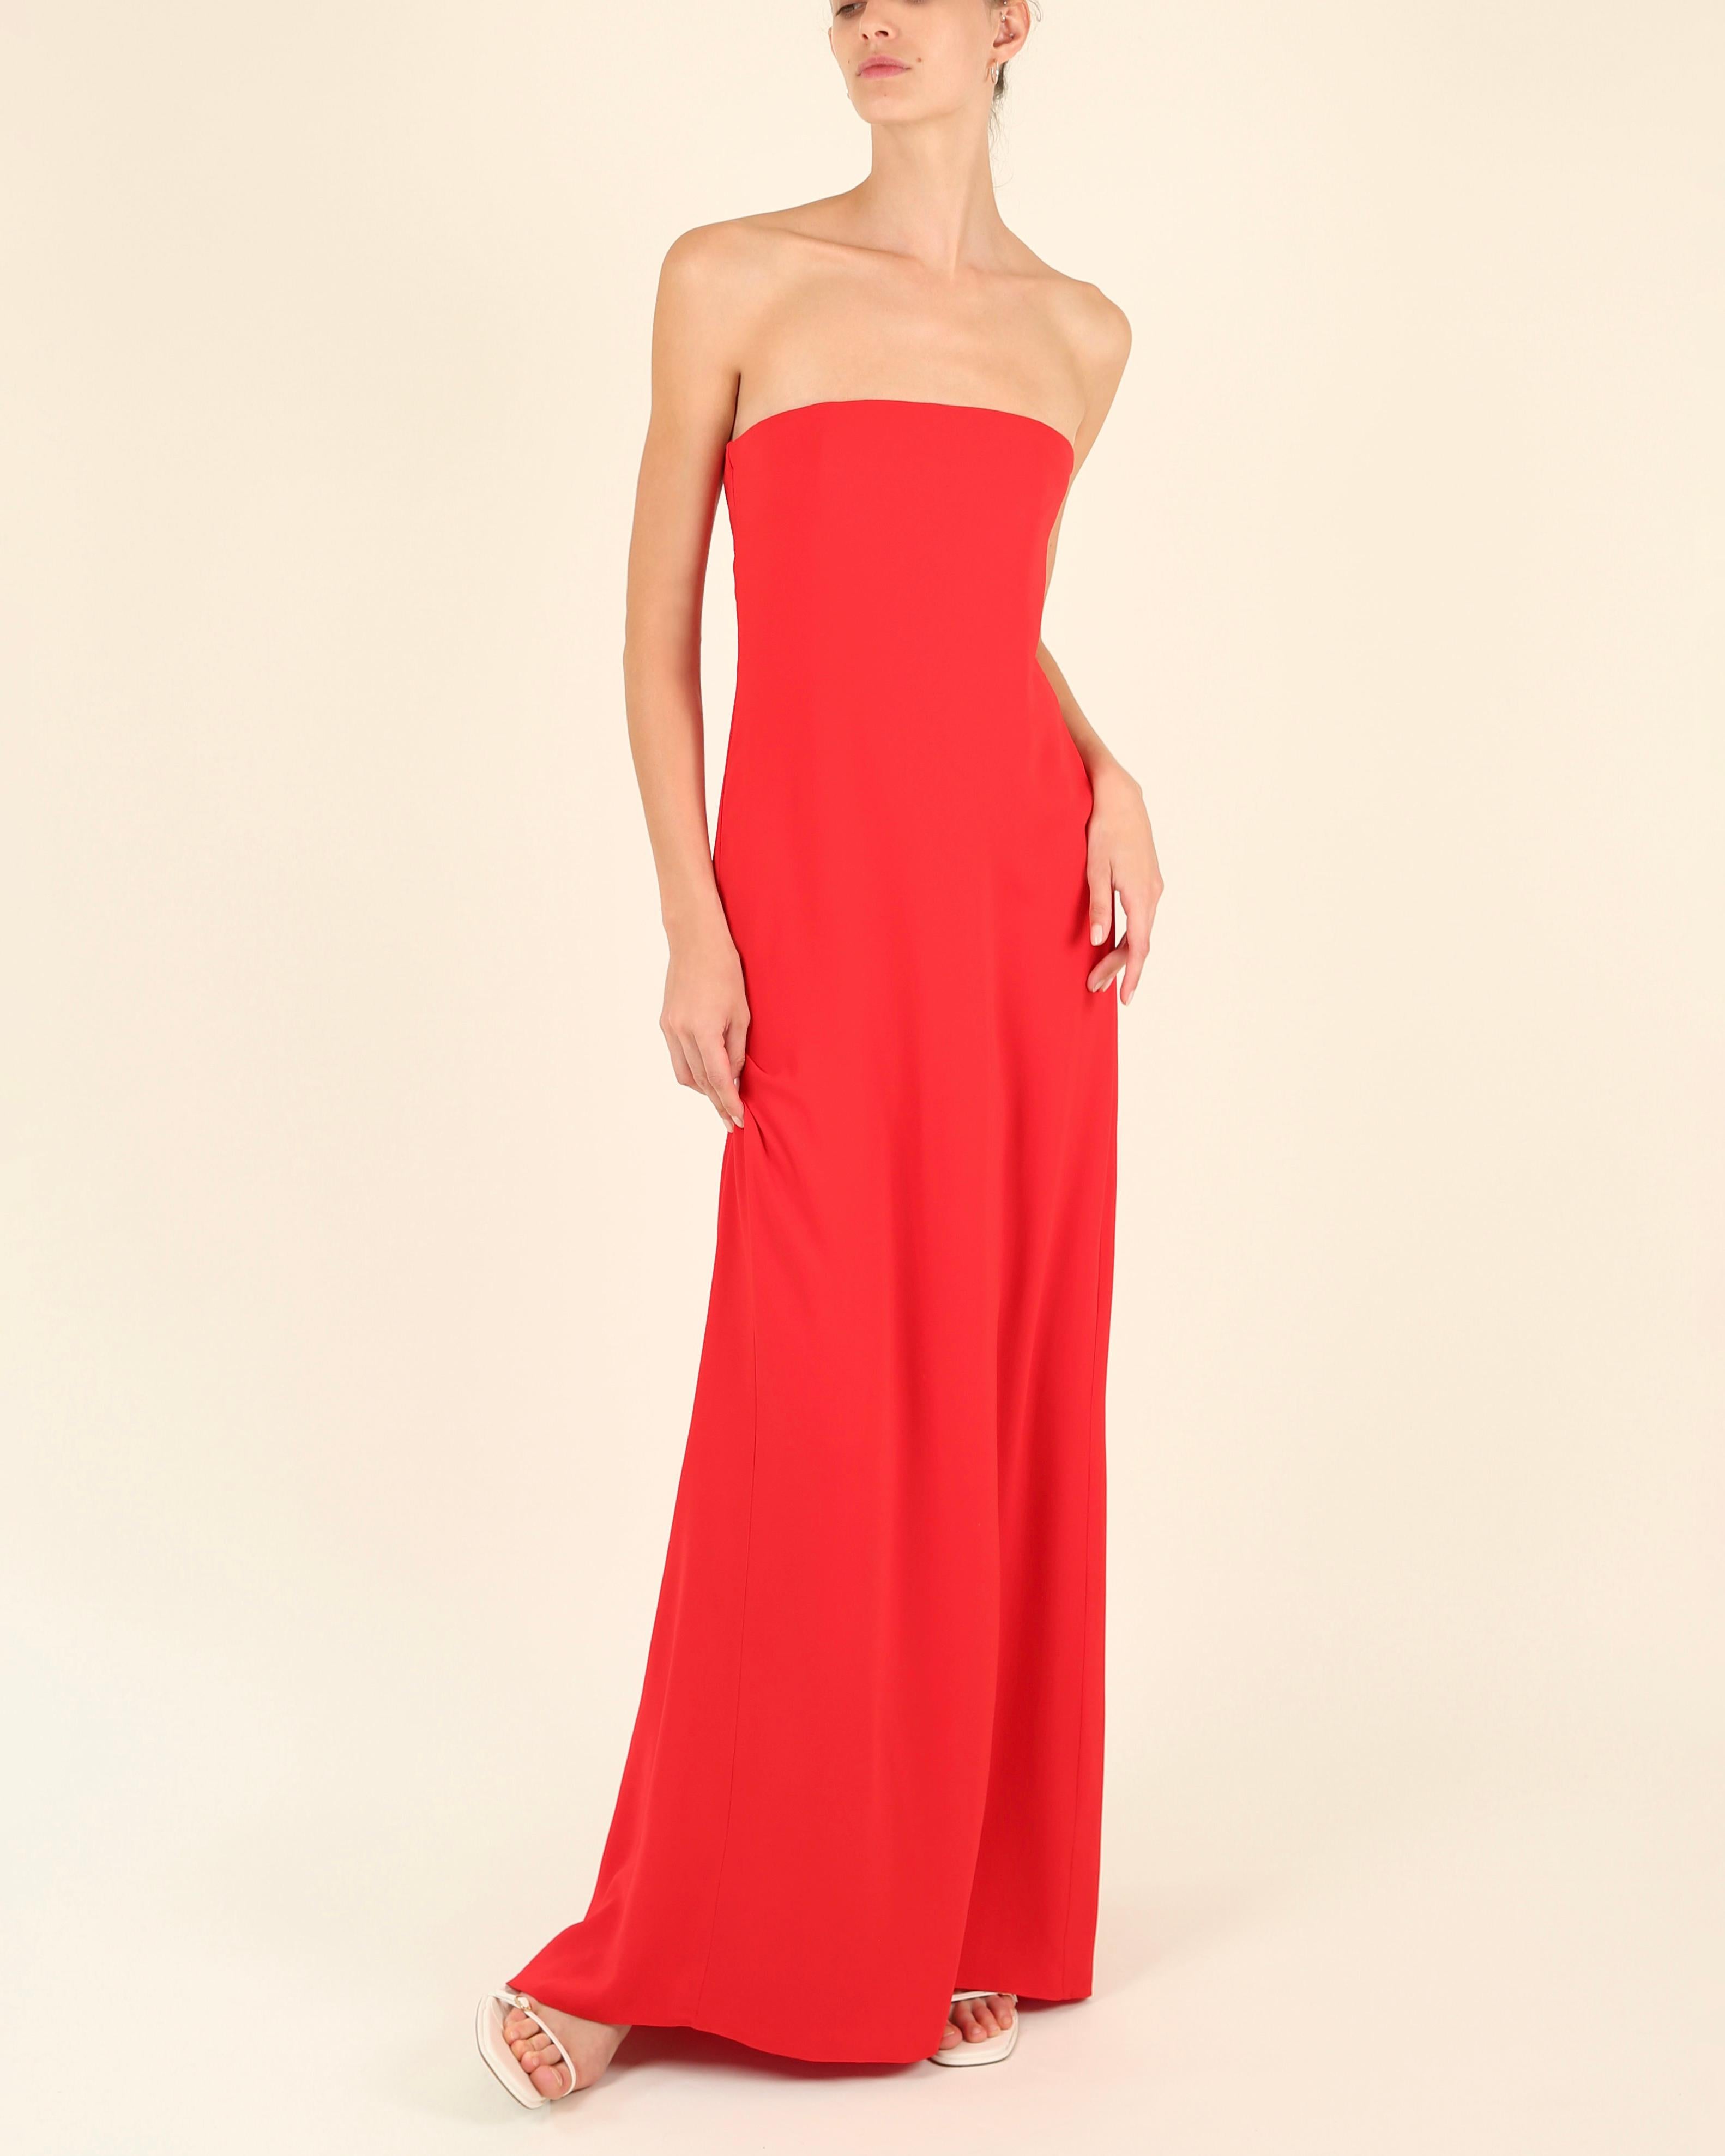 LOVE LALI Vintage

A beautifully simple and elegant yet striking dress by Gucci in vibrant red
Strapless cut that falls as a column gown
Beautiful long ties wrap at the back and tie into a bow creating long folds of flowing fabric that create a